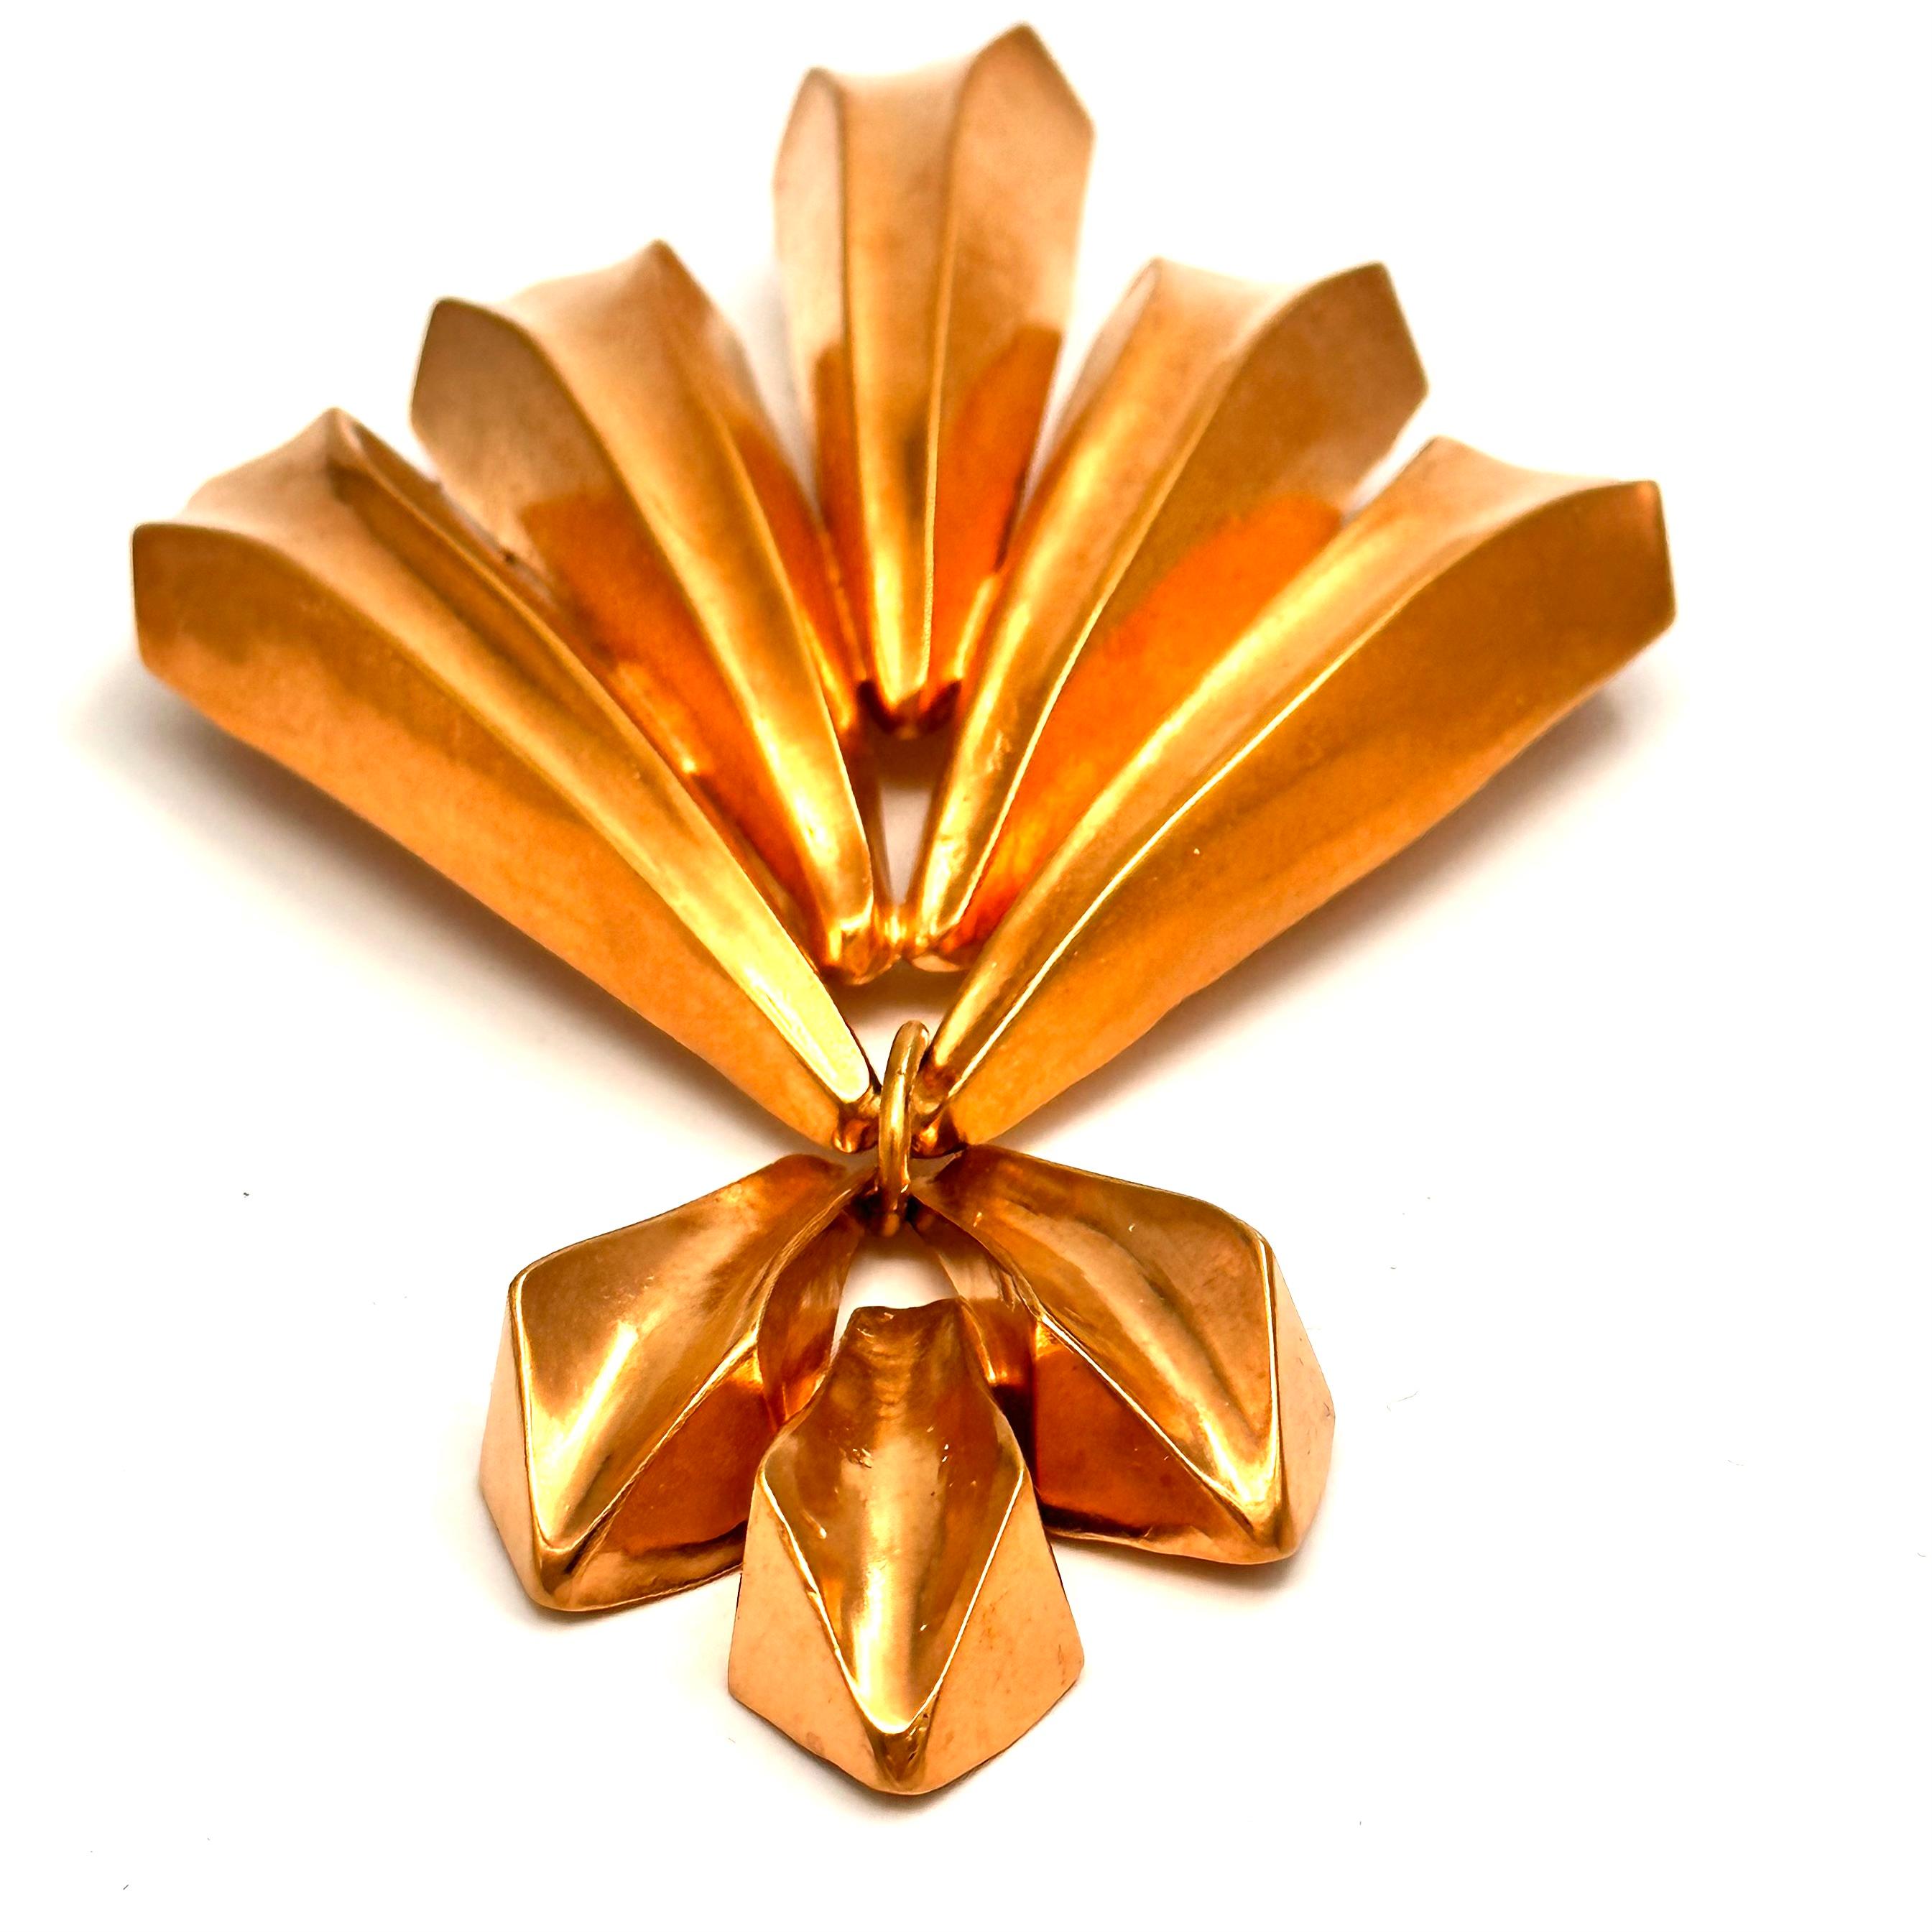 Created in the late 1980's for Donna Karan, Robert Lee Morris made this two part and very large brooch. The larger top resembles 5 jets flying in formation like the Blue Angels, and the hanging smaller bottom spray is a delightful and unexpected